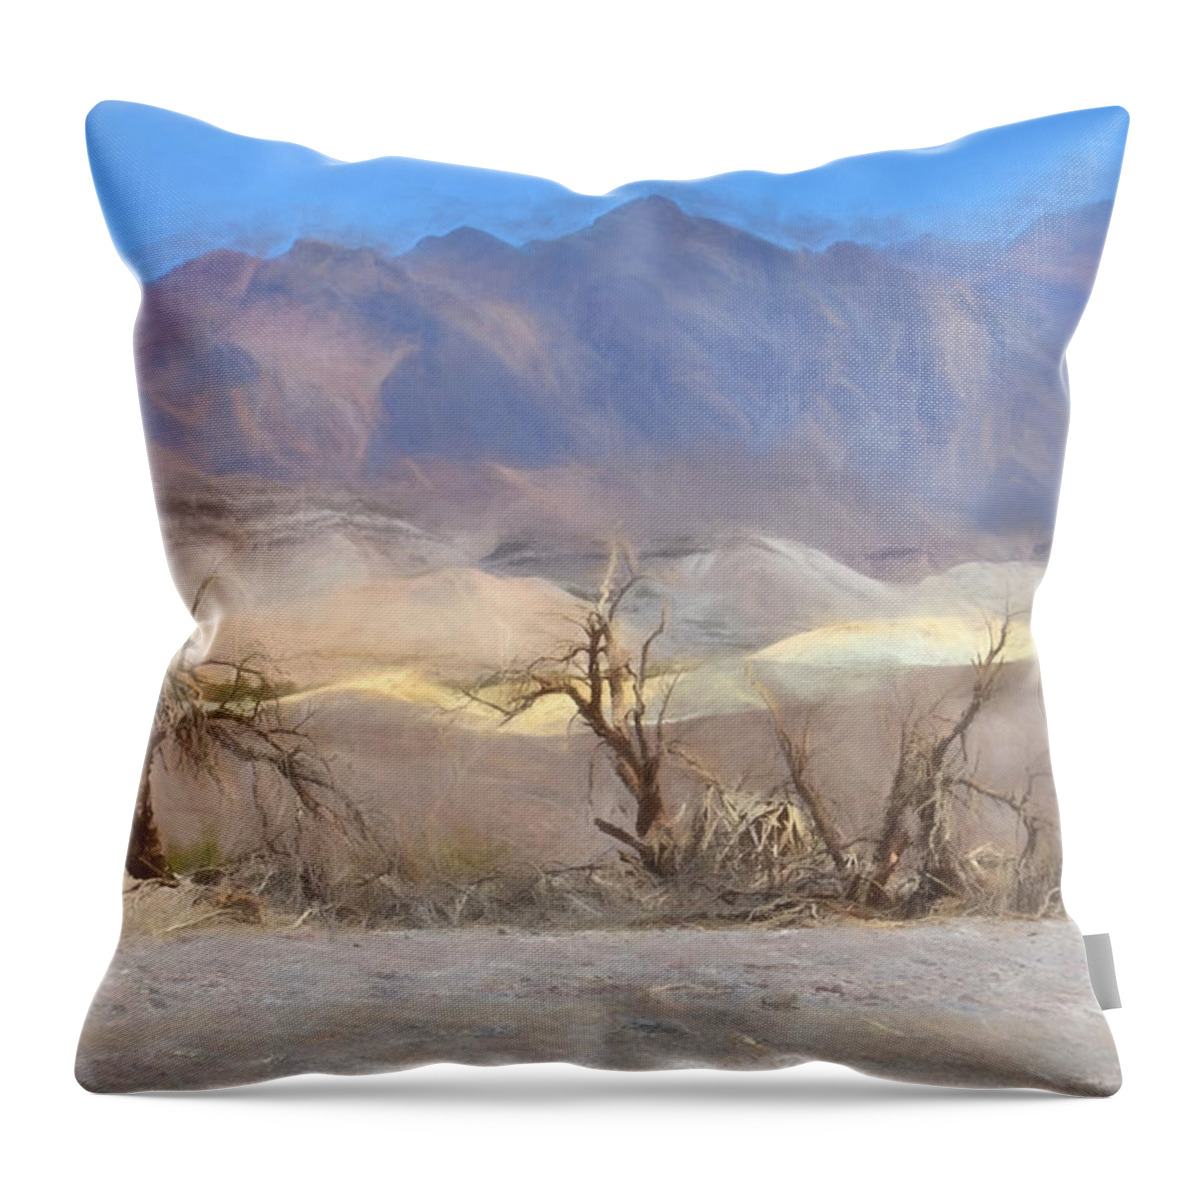 California Throw Pillow featuring the photograph Dunes by Ricardo Dominguez